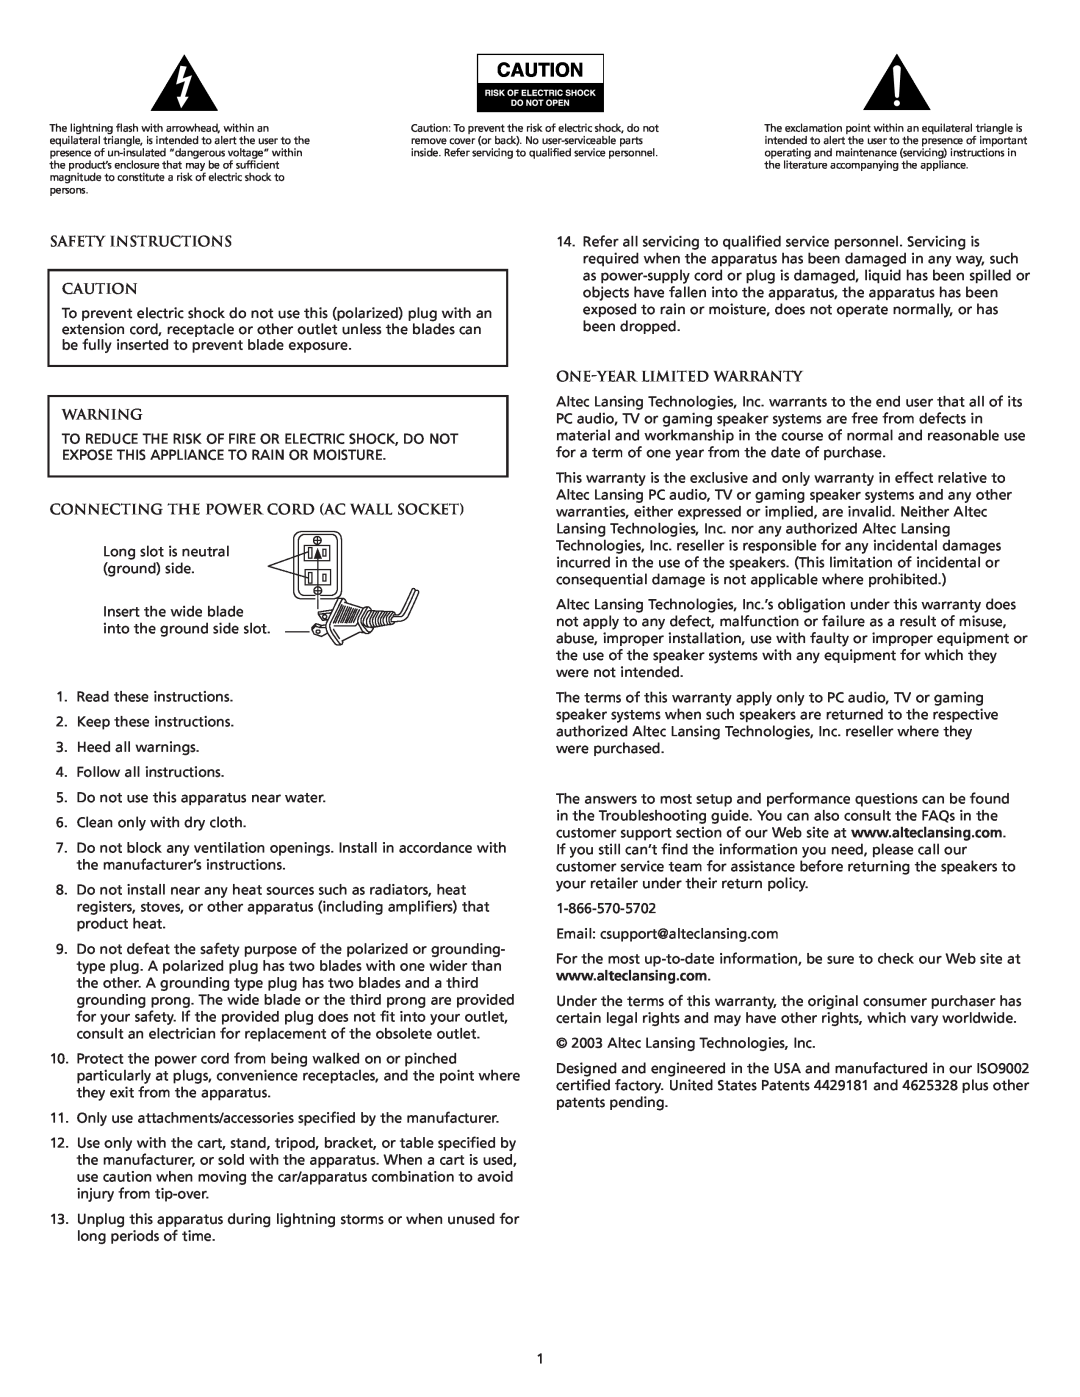 Altec Lansing CS21 manual Safety Instructions, Connecting The Power Cord Ac Wall Socket, One-Yearlimited Warranty 